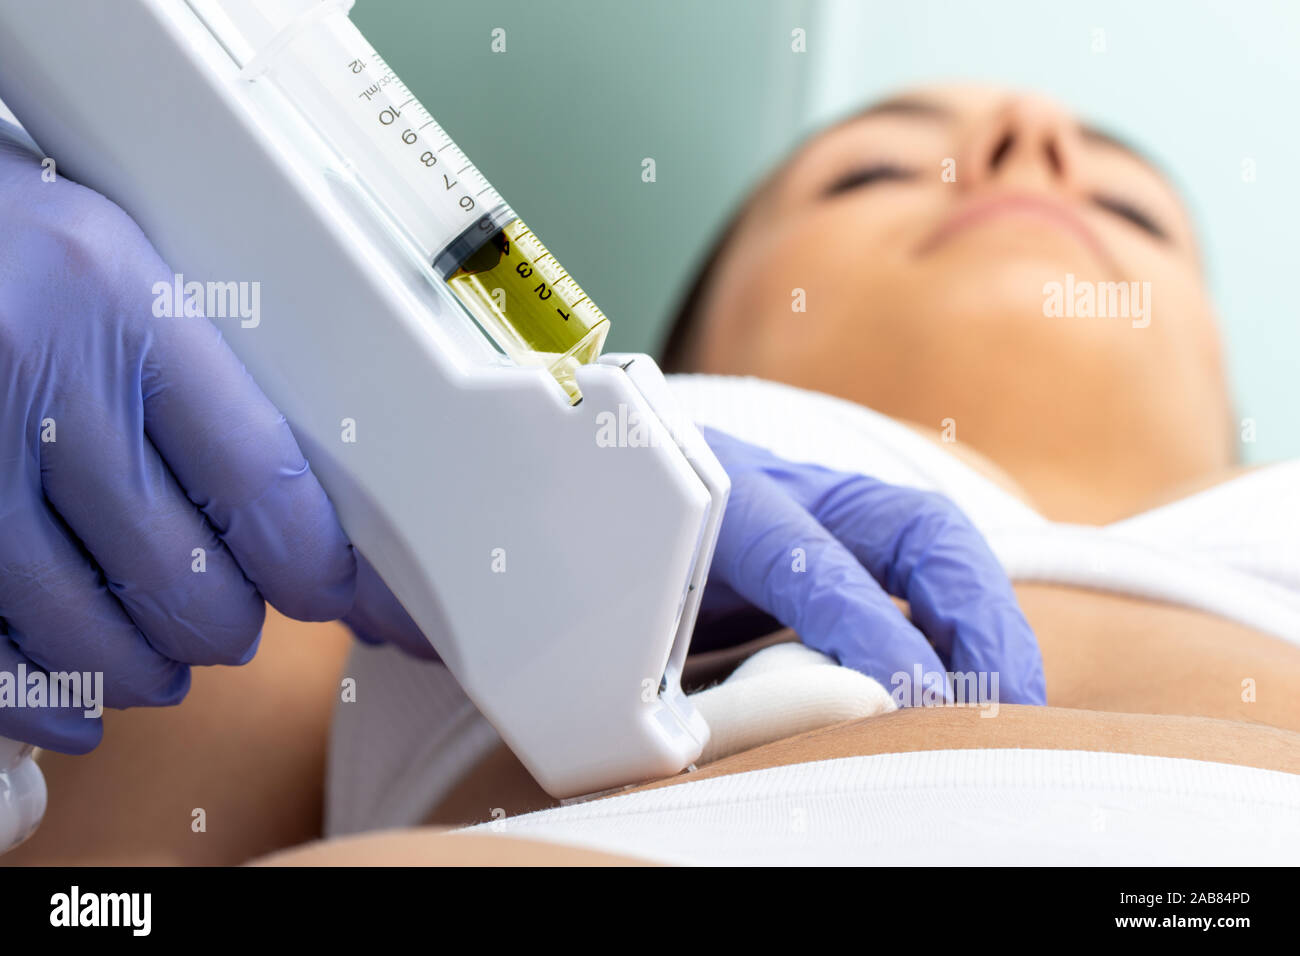 Therapist doing non-surgical cosmetic medicine treatment on female tummy with micro needle. Stock Photo